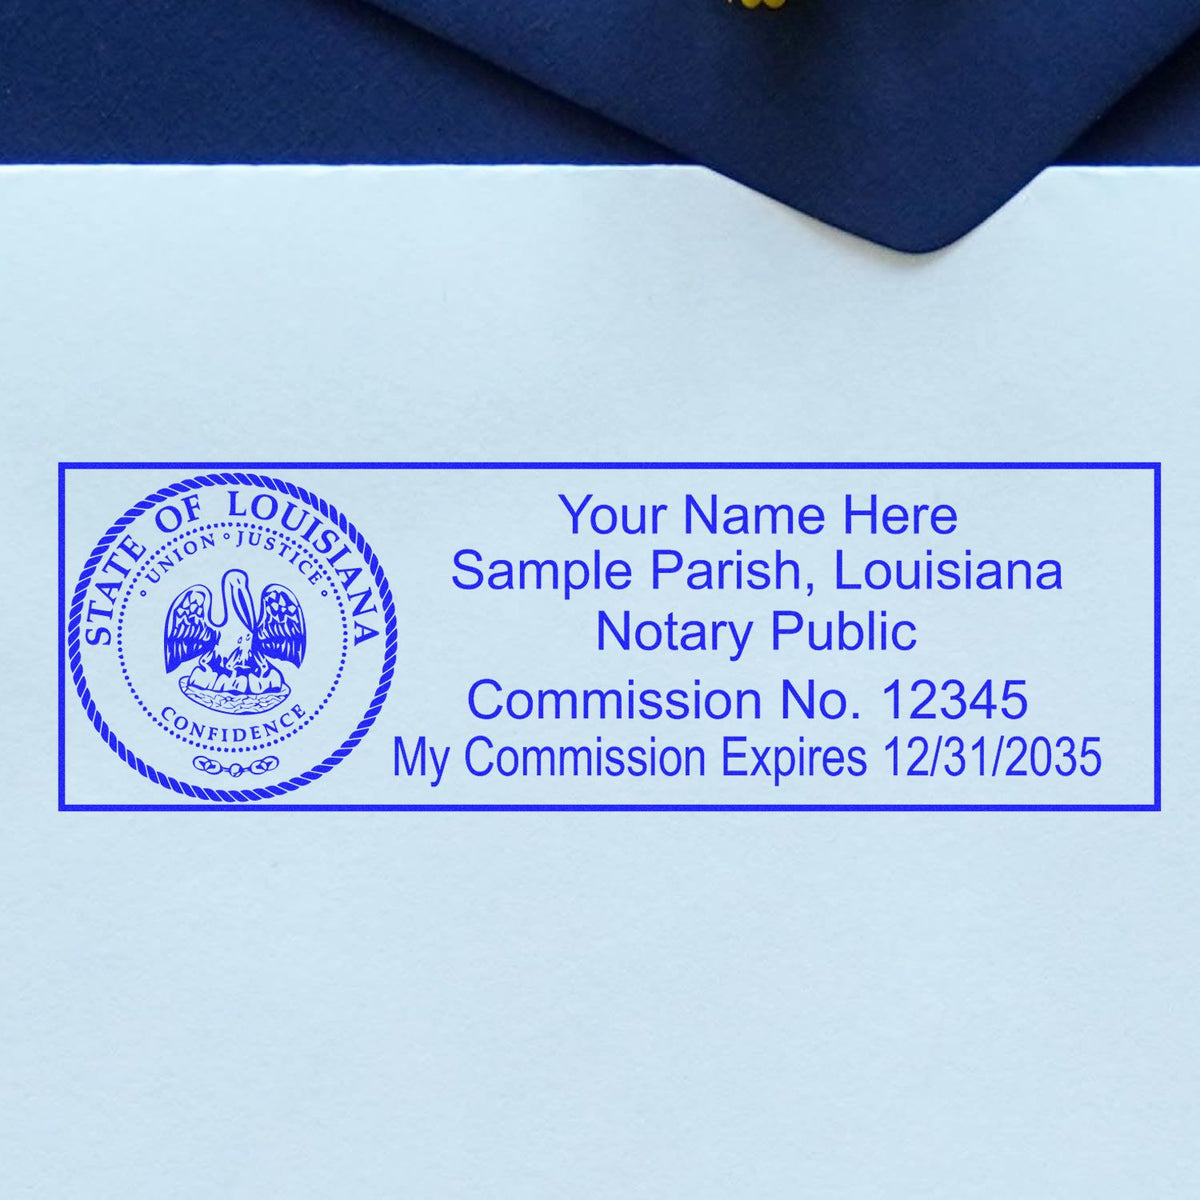 A lifestyle photo showing a stamped image of the Wooden Handle Louisiana State Seal Notary Public Stamp on a piece of paper